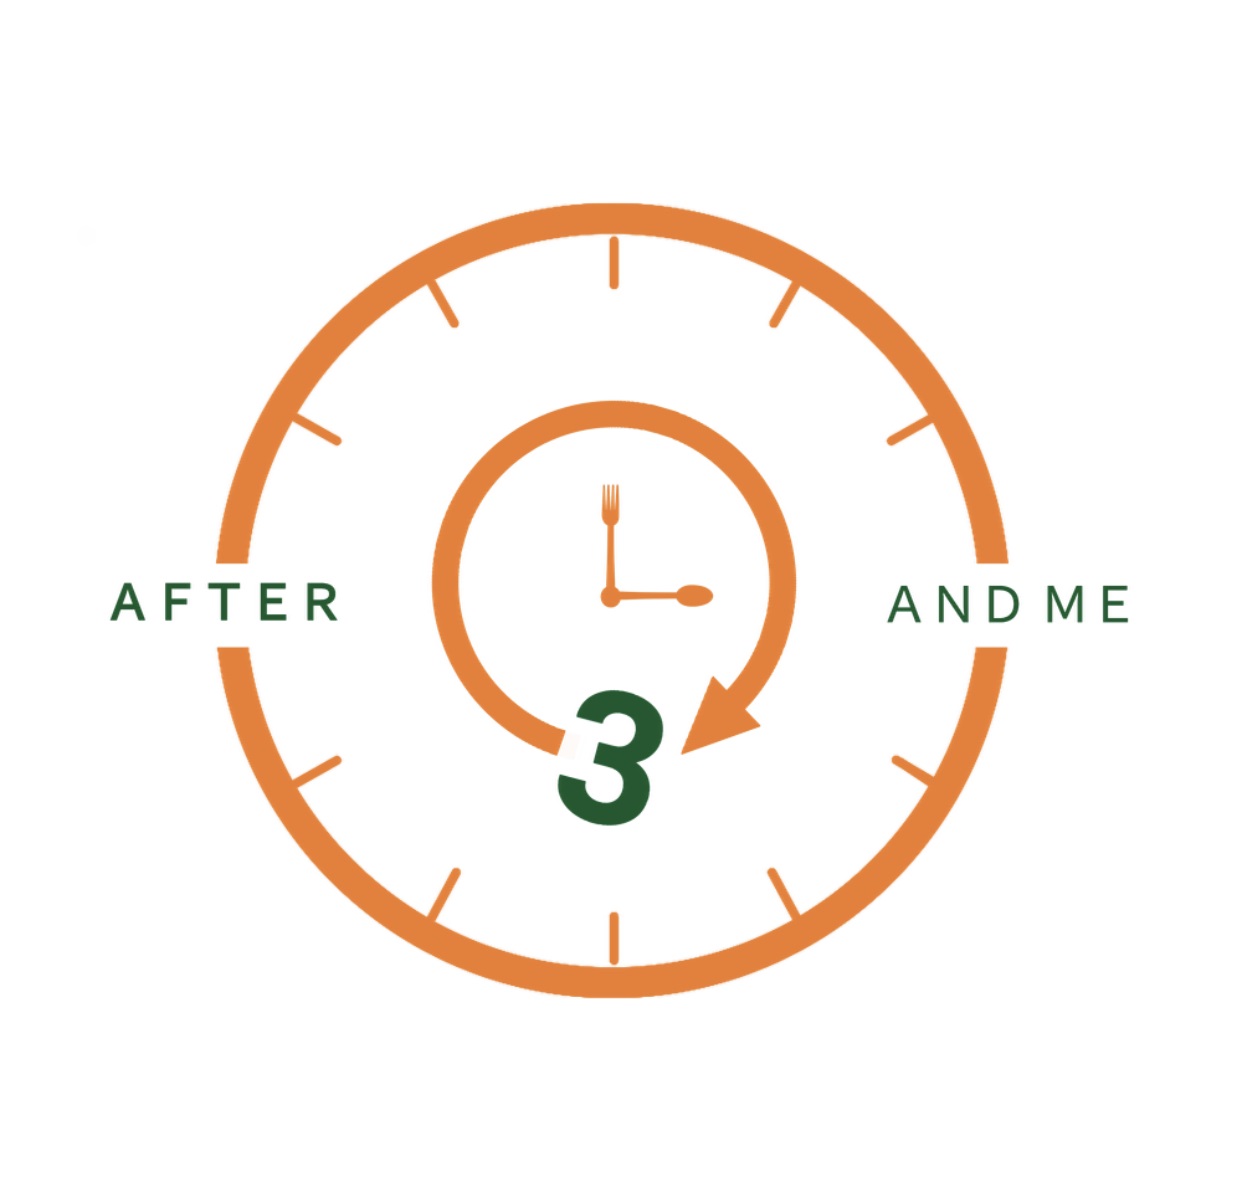 After 3 And Me logo